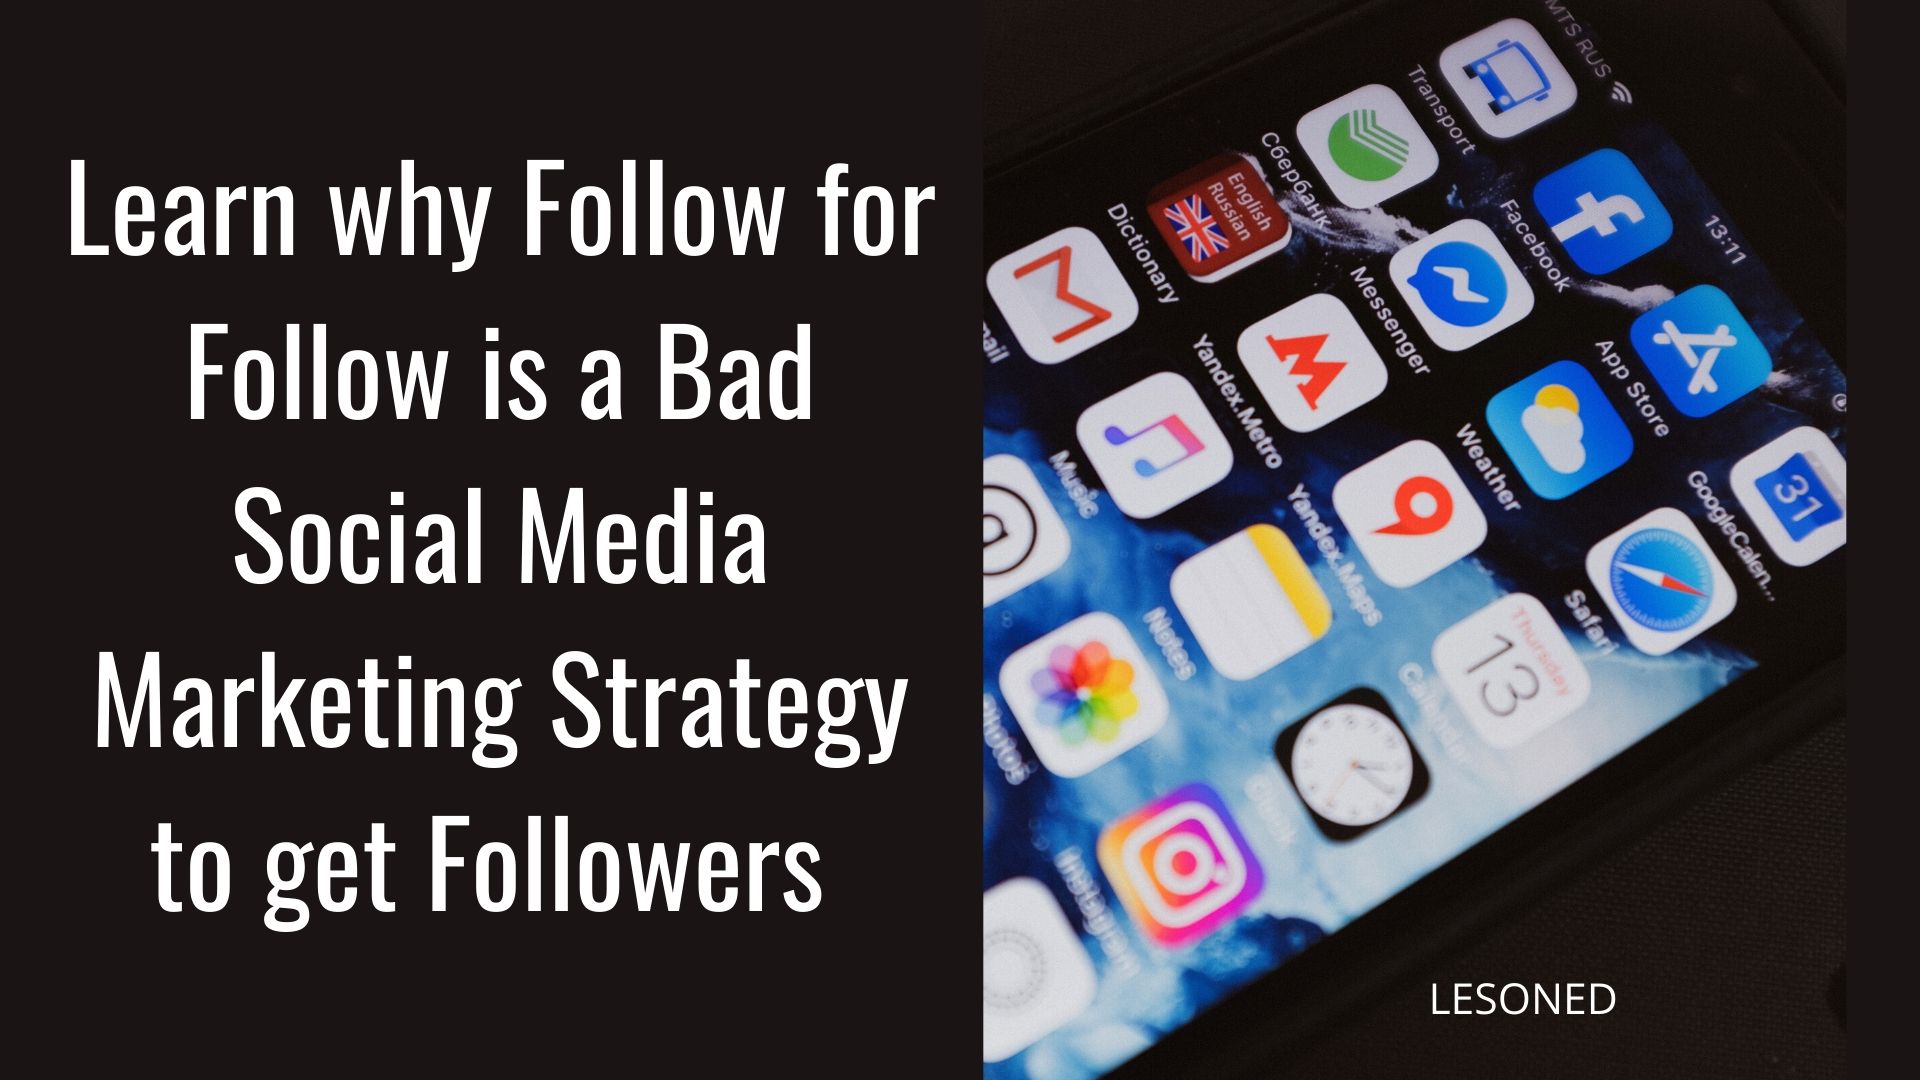 Learn why Follow for Follow is a Bad Social Media Marketing Strategy to get Followers